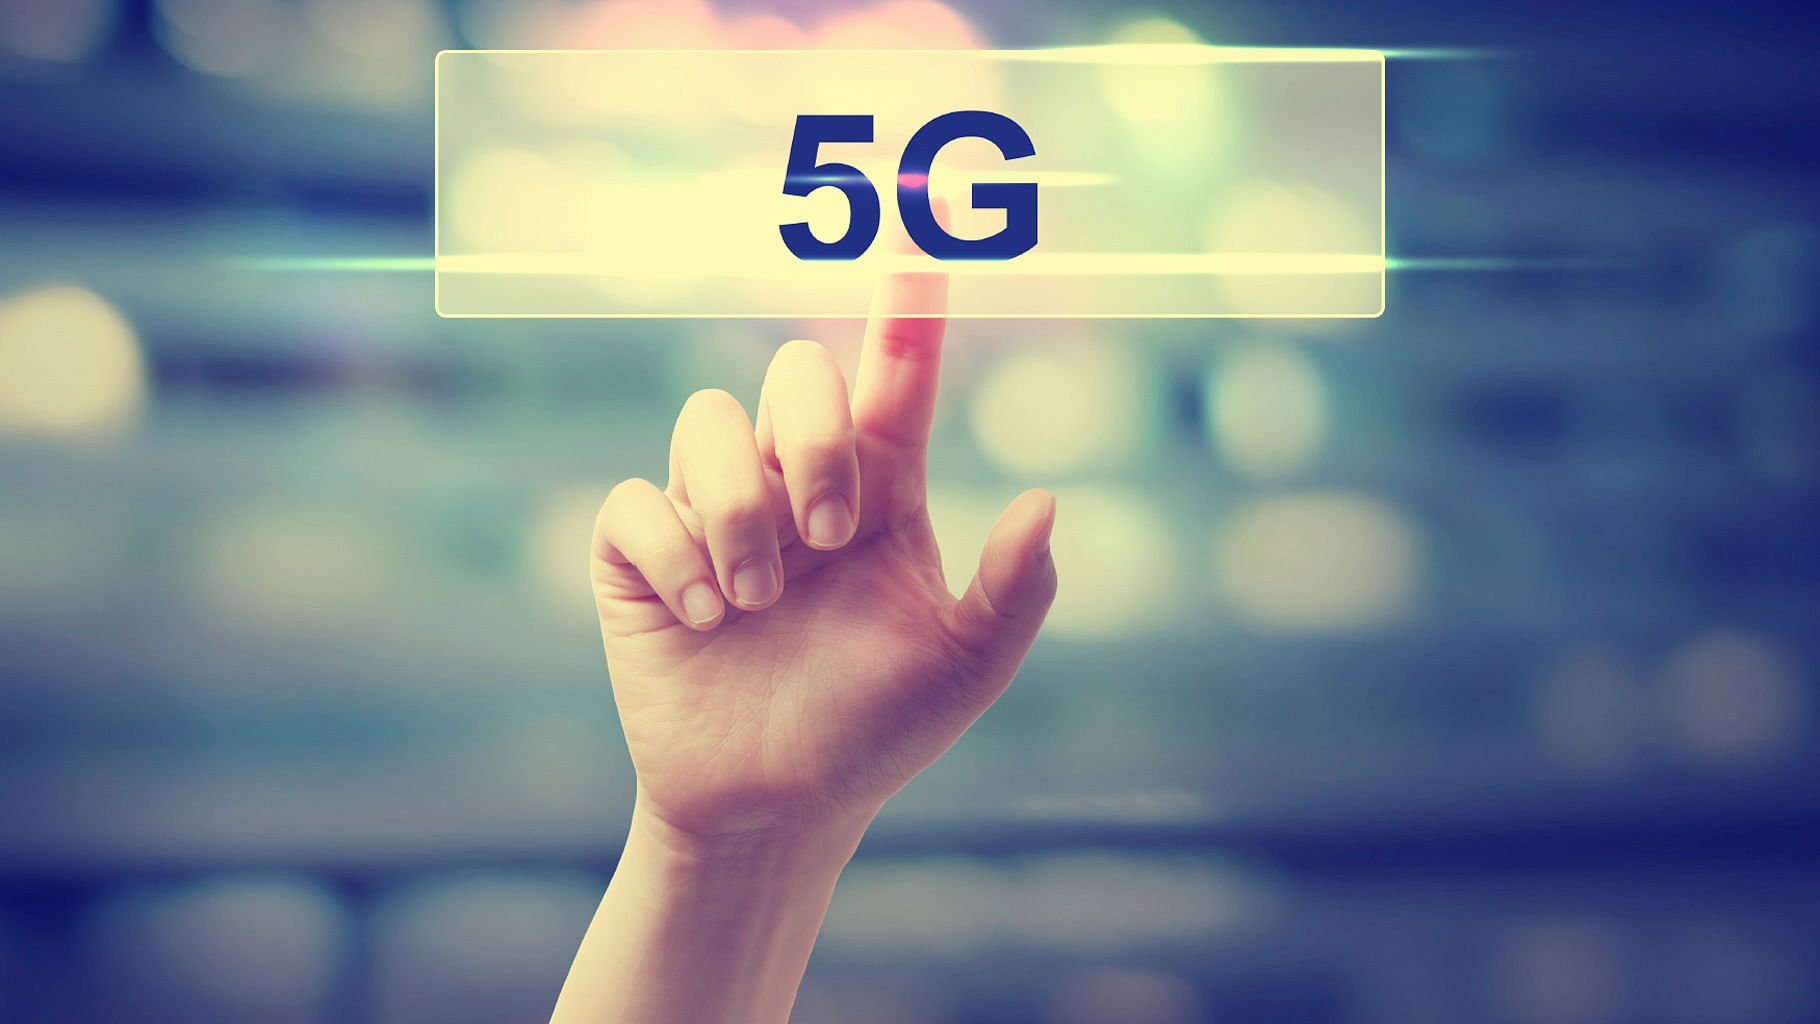 5G rollout is expected to happen in 2019, but which phones will support it?